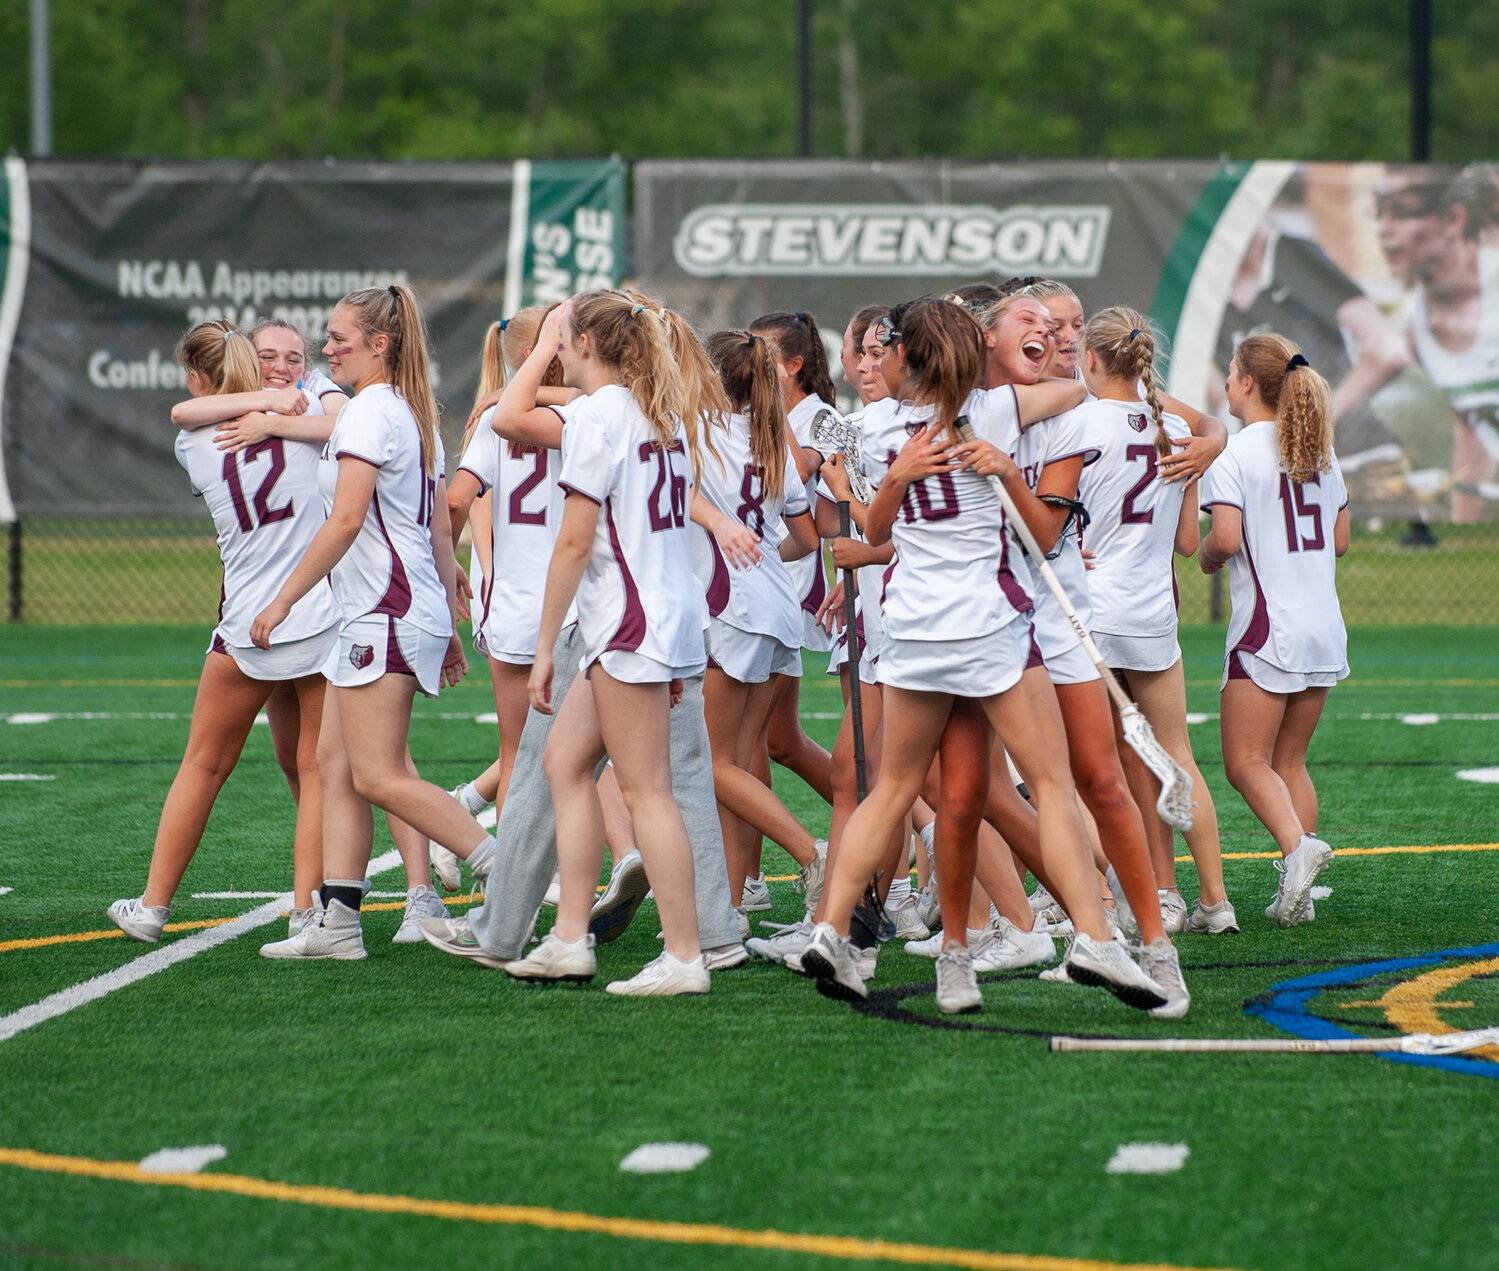 The Broadneck girls lacrosse team celebrated after surviving Dulaney’s late rally to win the 4A state championship.